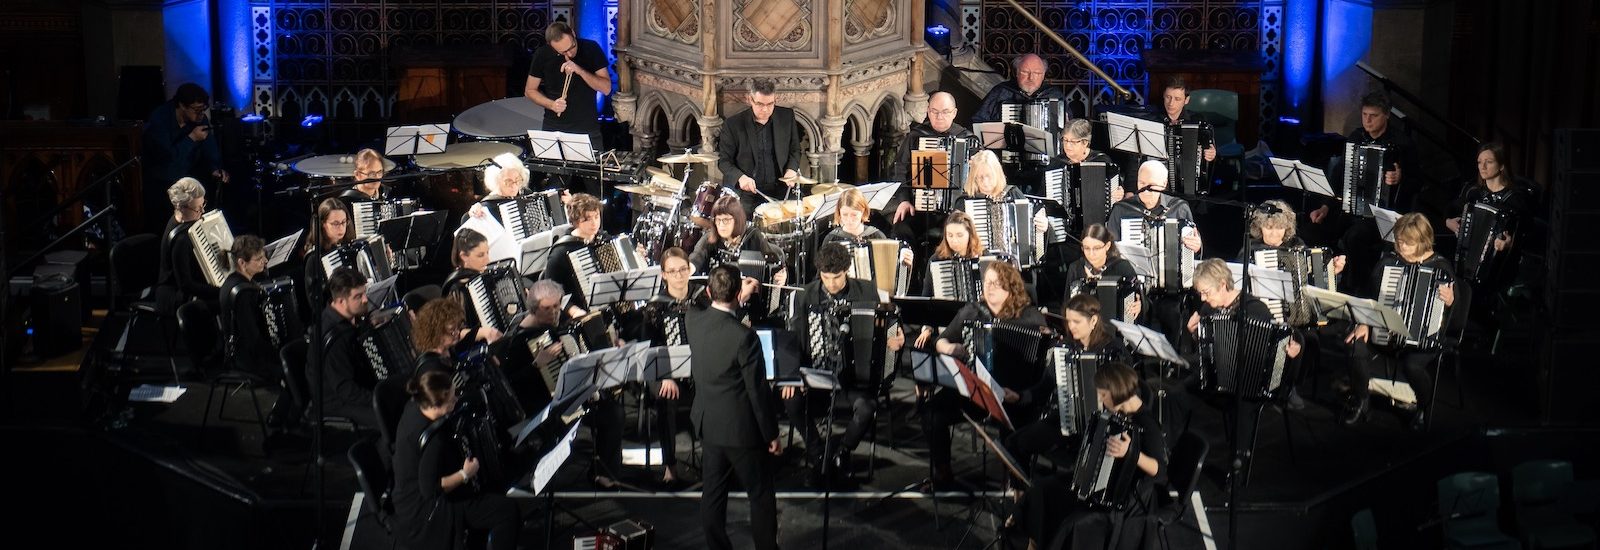 London Accordion Orchestra in concert at Union Chapel in front of blue lights